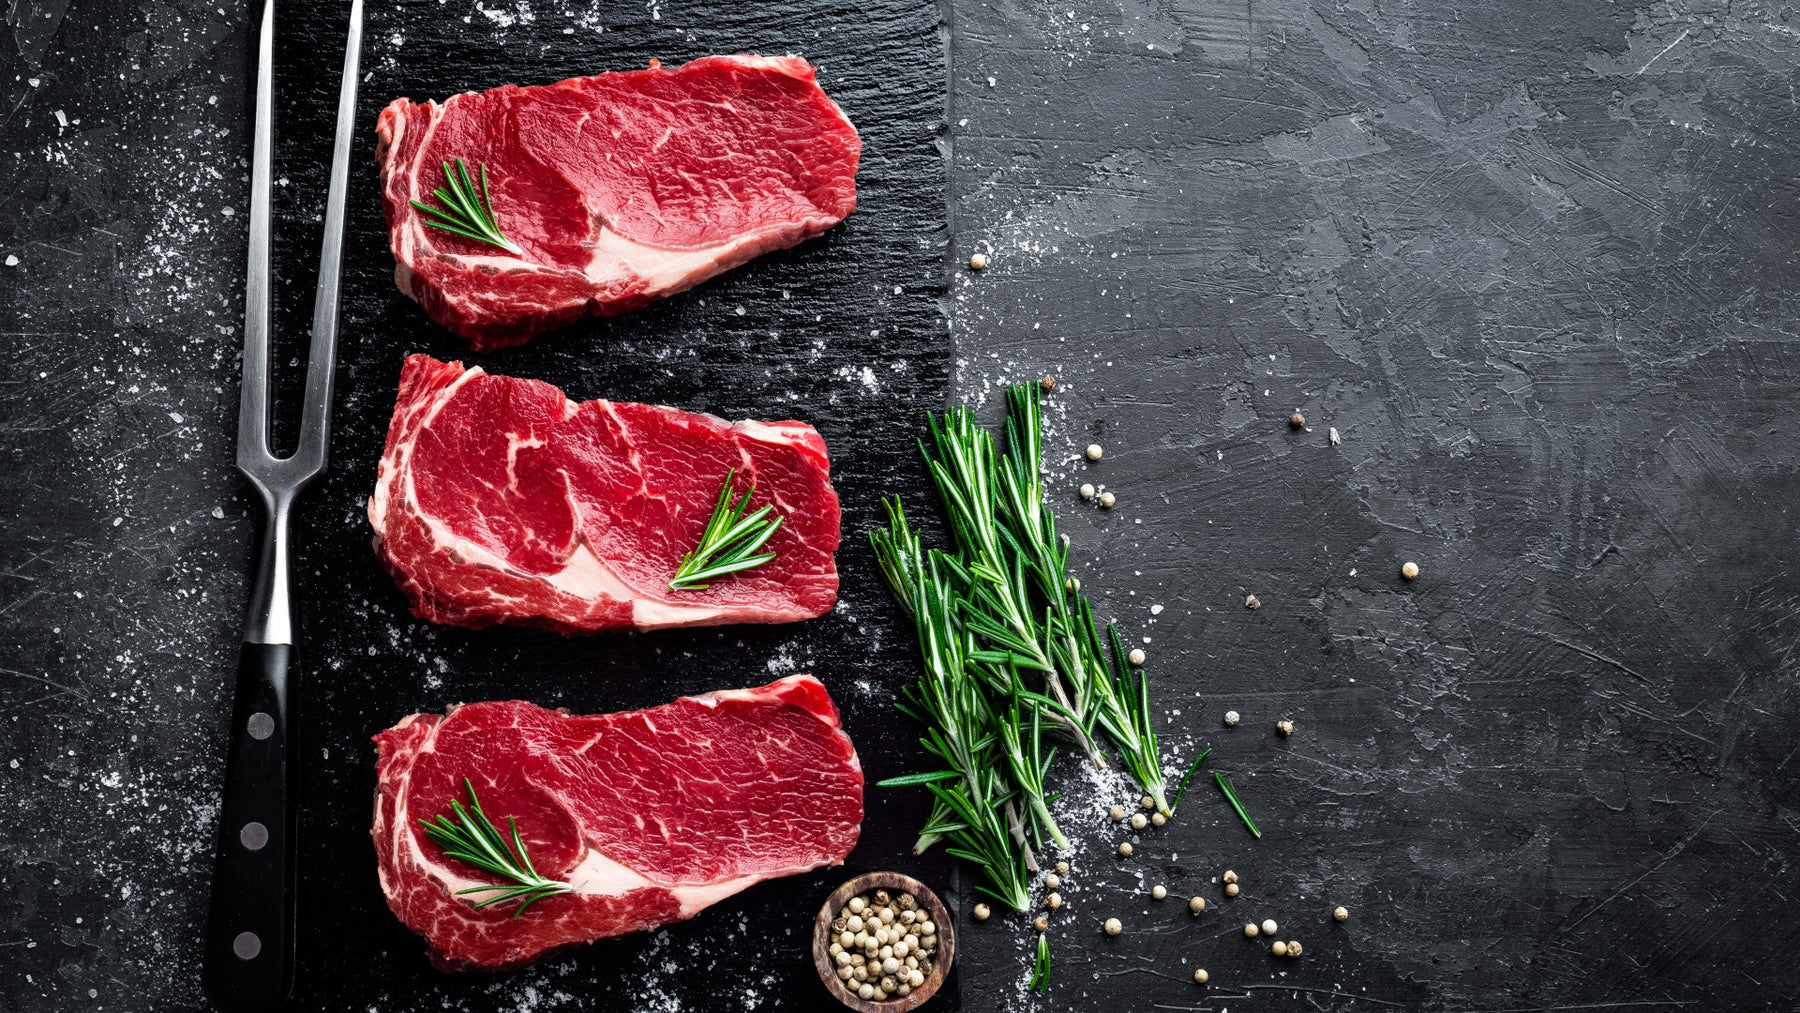 Red Meat is Safe and Healthy - New Comprehensive Study Reveals